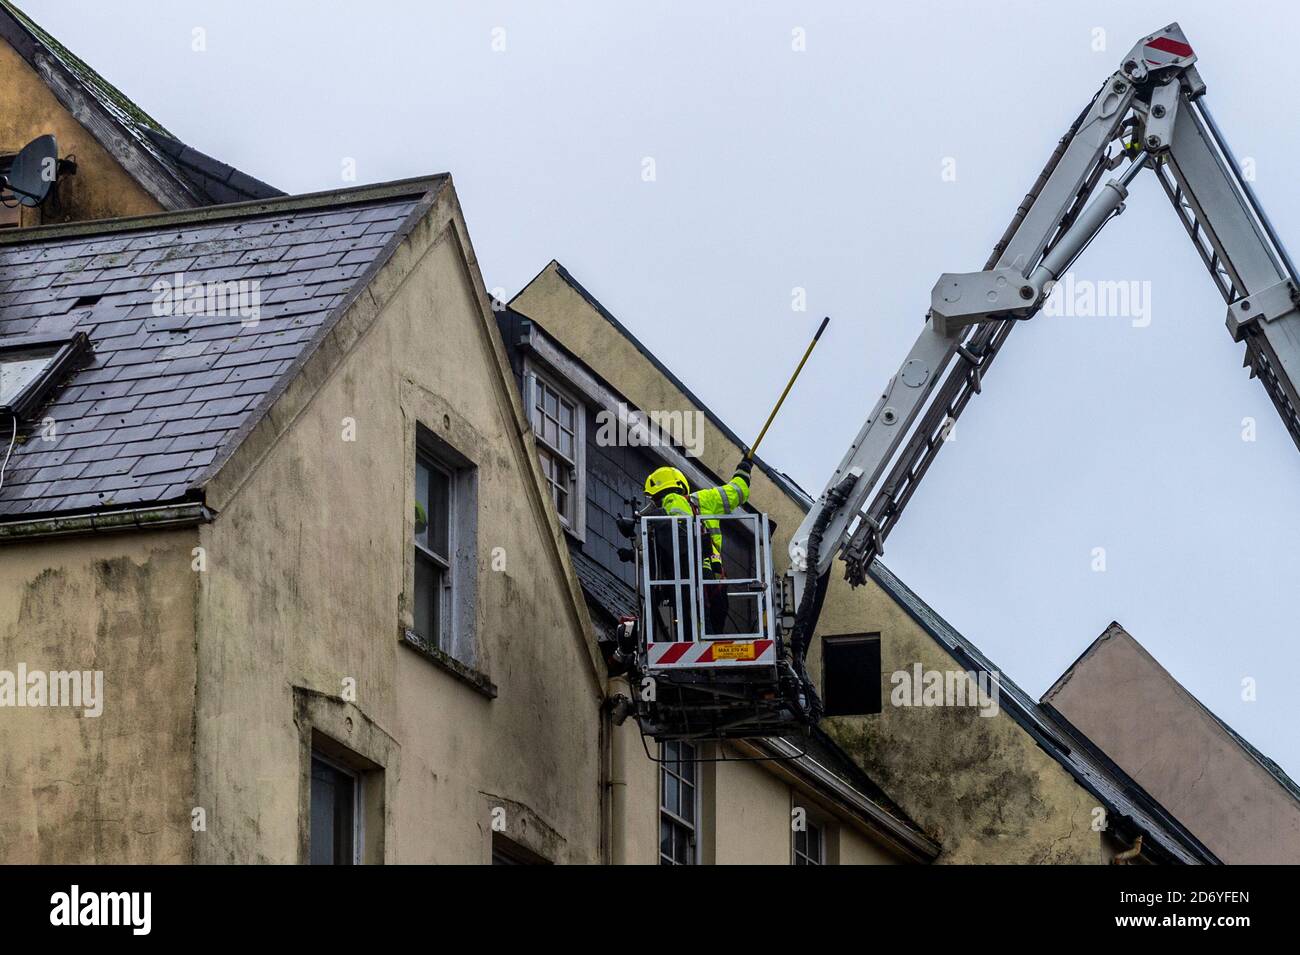 Cork, Ireland. 20th Oct, 2020. Slates fell off a building on the corner of Dunbar Street and George's Quay this morning, due to the high winds. The fire brigade attended to make the roof safe. The road was closed for a short time. Credit: AG News/Alamy Live News Stock Photo